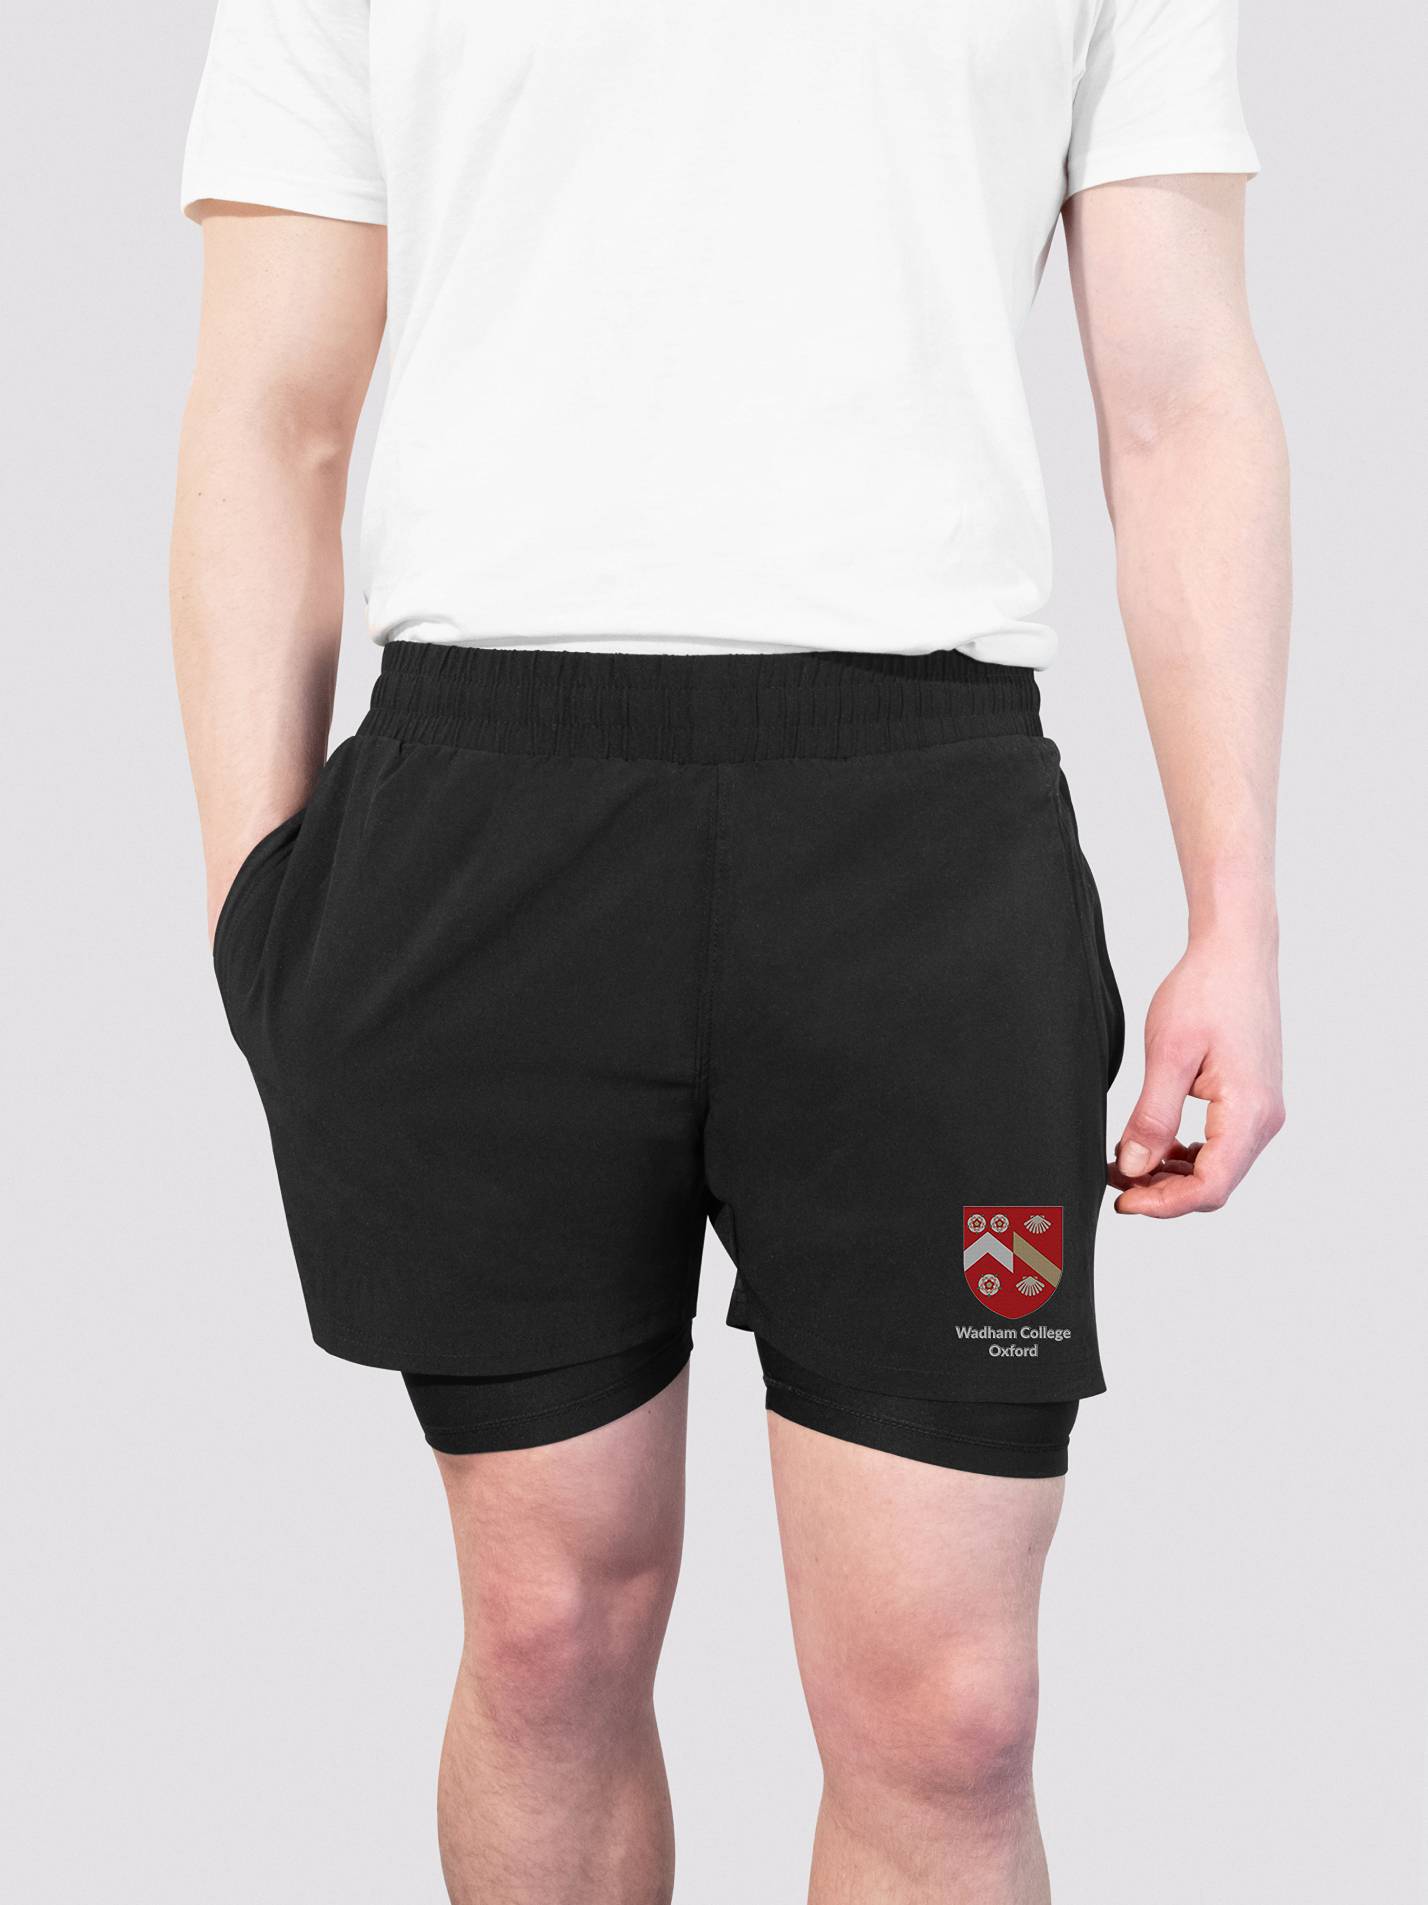 Wadham College Oxford Dual Layer Sports Shorts